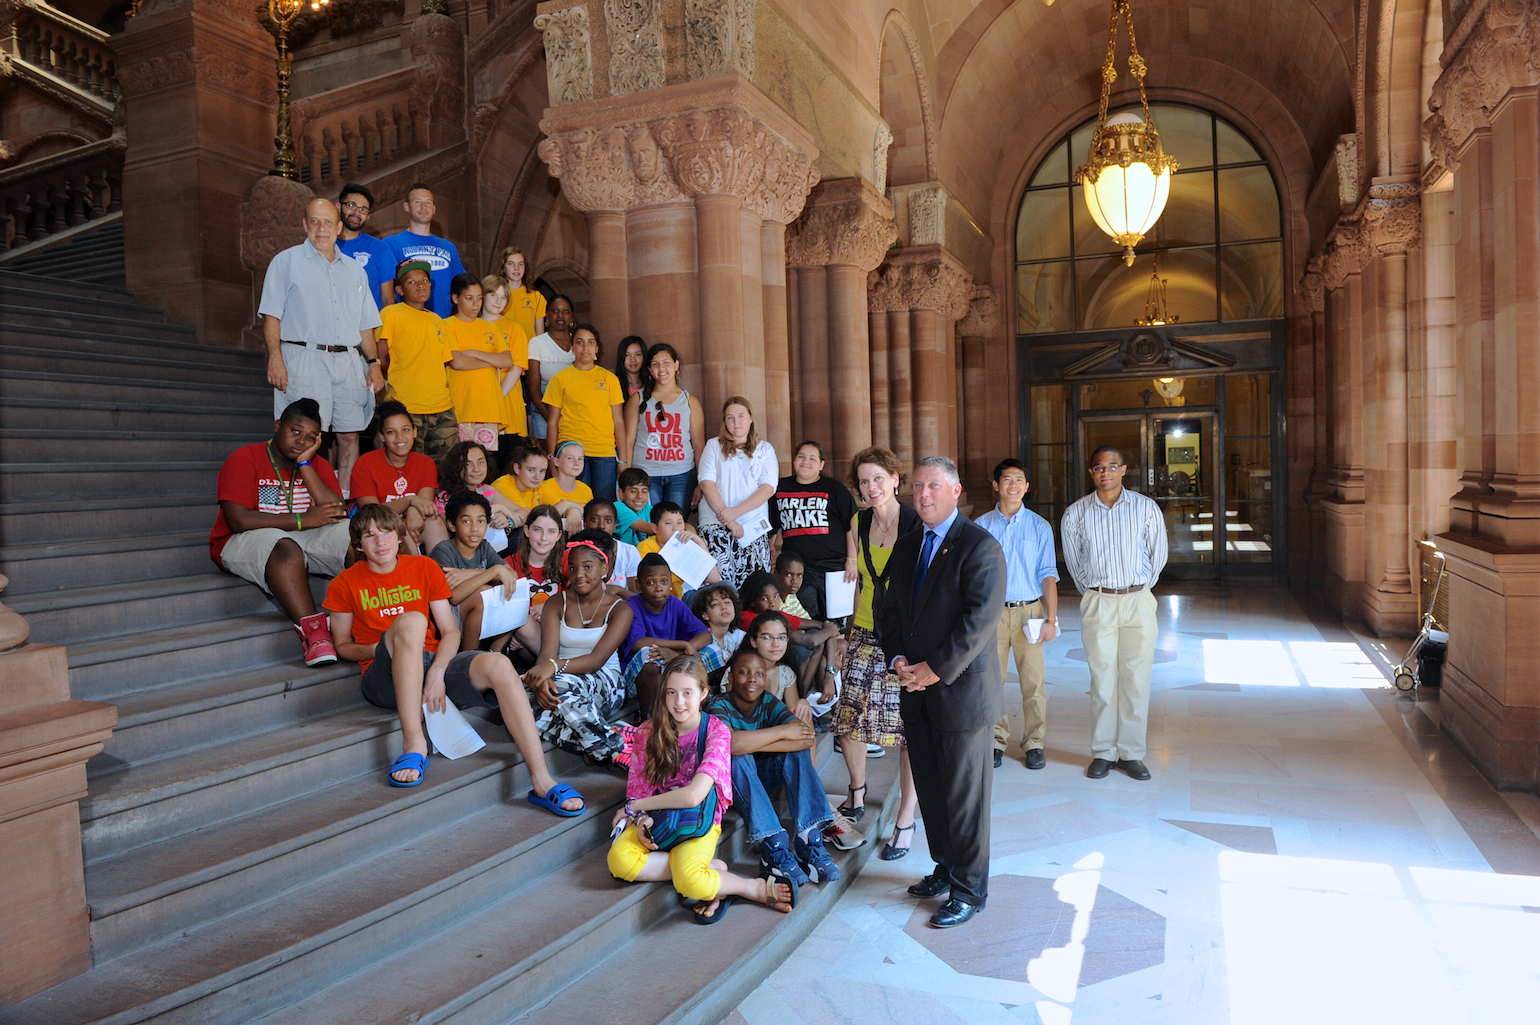 Assemblymembers Fahy and McDonald pictured with Albany Police Athletic League’s Summer Camp at the Million Dollar staircase in the Capitol.